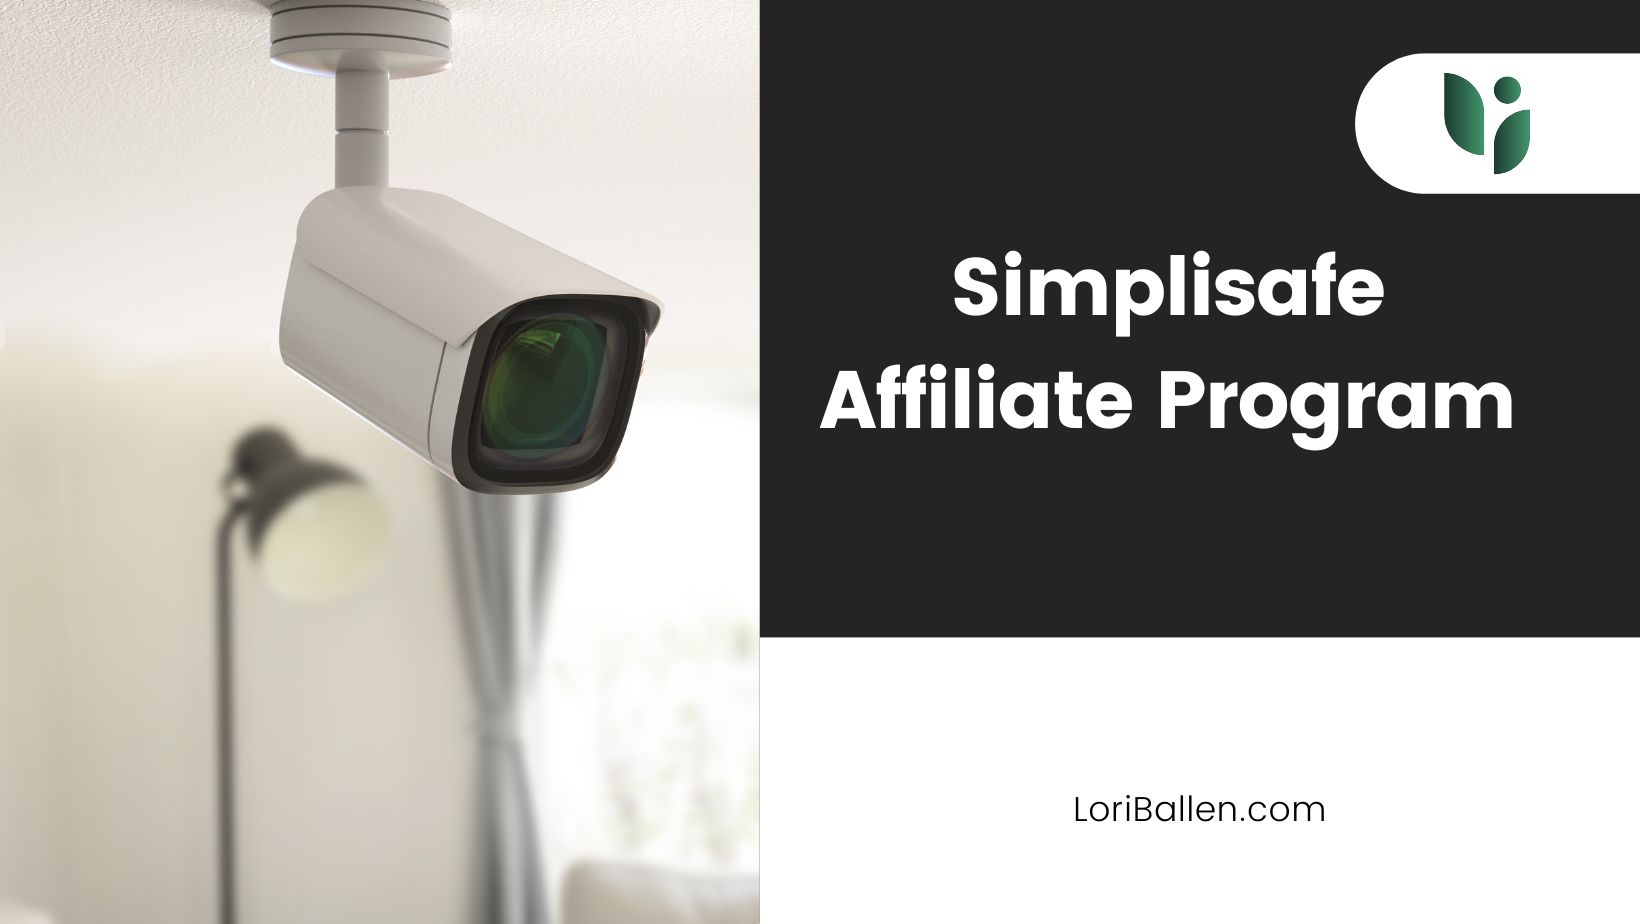 You can make money online with the SimpliSafe affiliate program. Promote home security, cameras, alarms, etc.